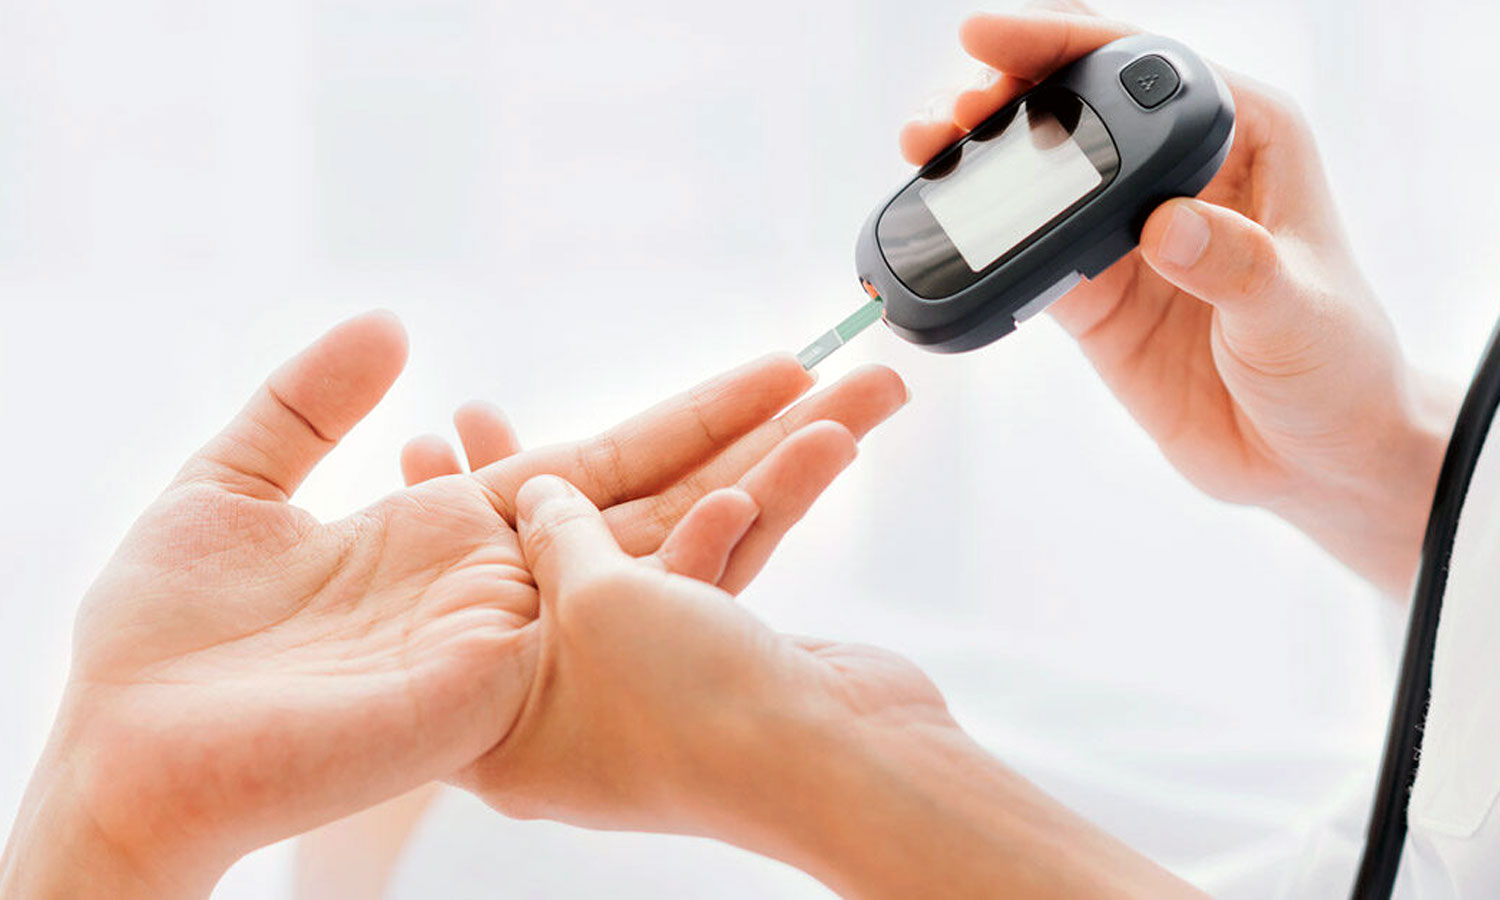 Signs of Diabetes Most People Ignore